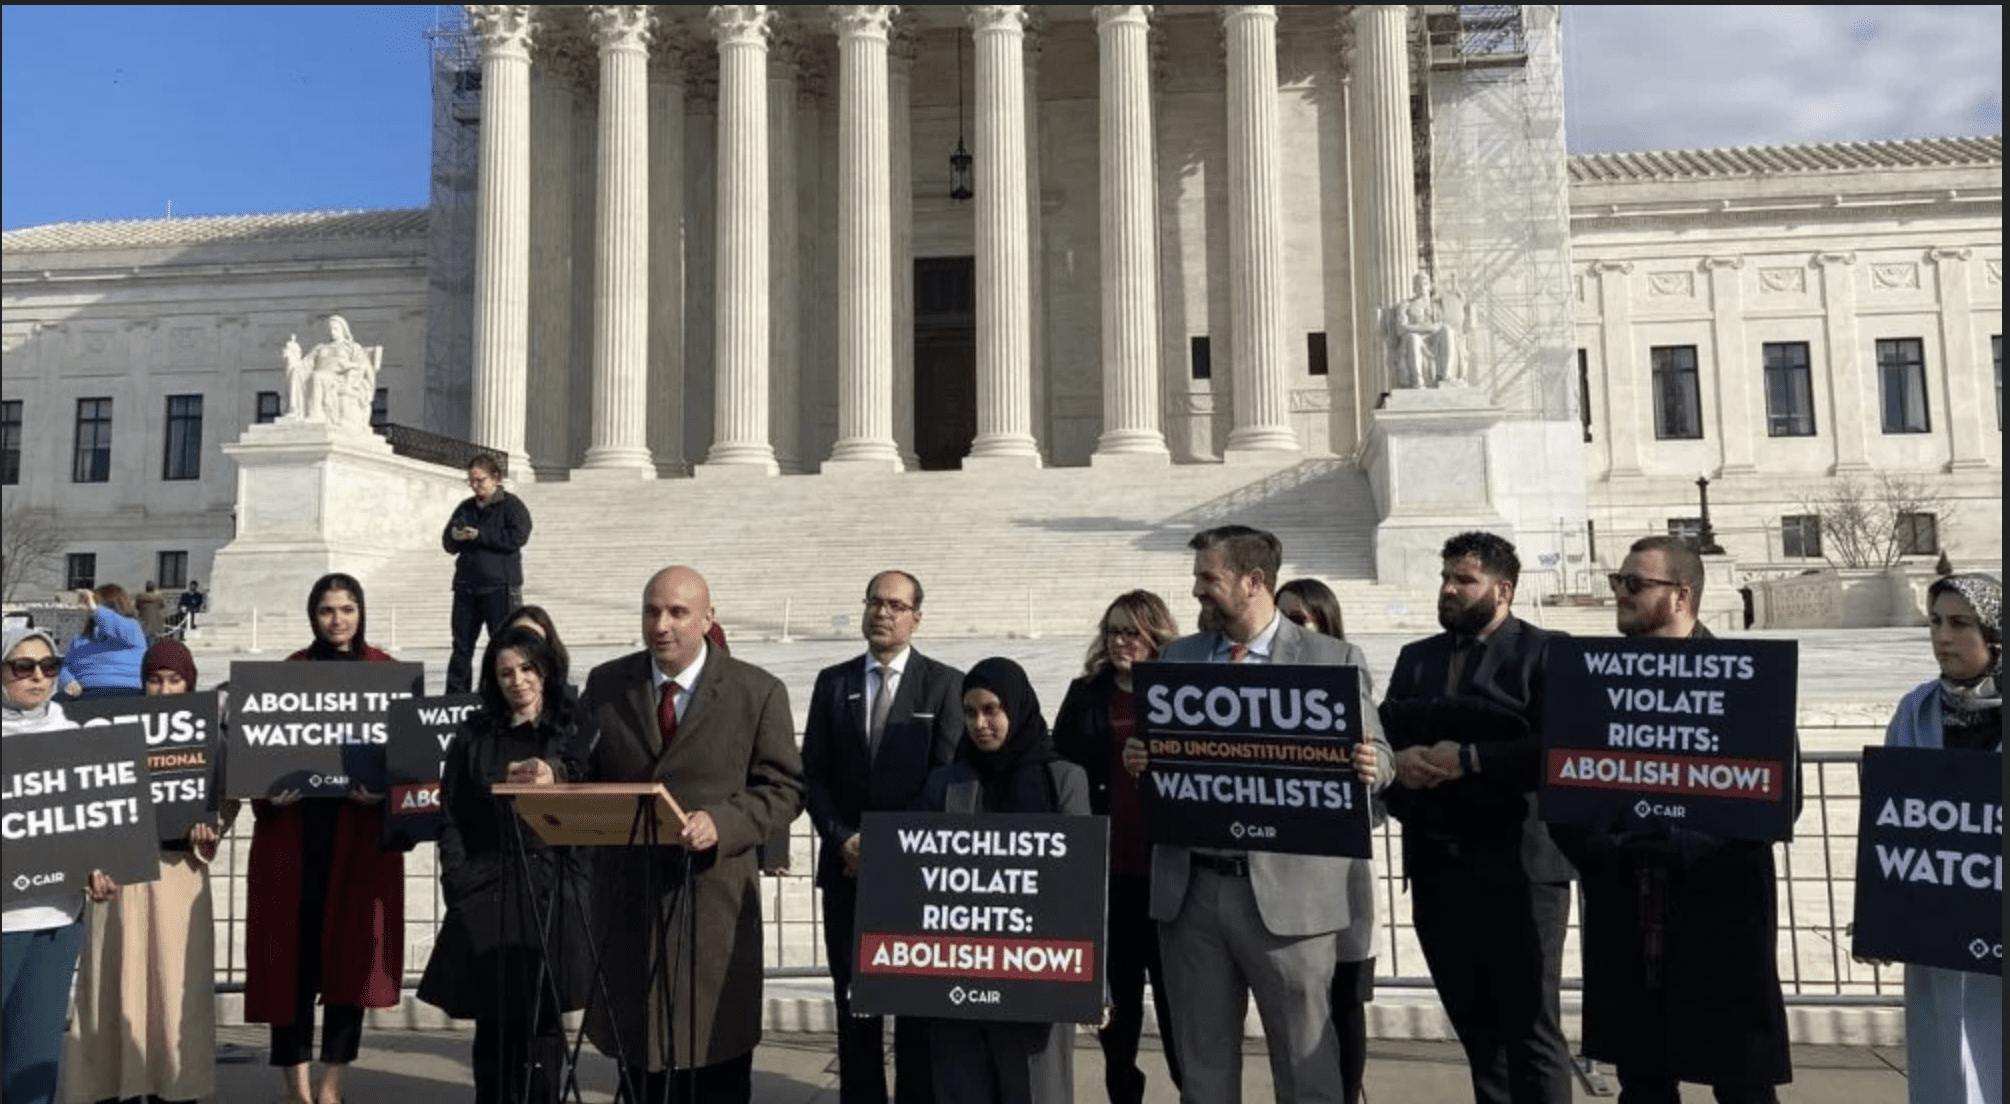 In front of the Supreme Court in Washington, D.C. is CAIR National Deputy Litigation Director Gadeir Abbas, who argued the case for Yonas Fikre before the Supreme Court on January 8, speaking to the media and to his right is CAIR National Litigation Director Lena Masri and standing behind him is CAIR National Executive Director Nihad Awad surrounded by supporters. - Photo courtesy of CAIR